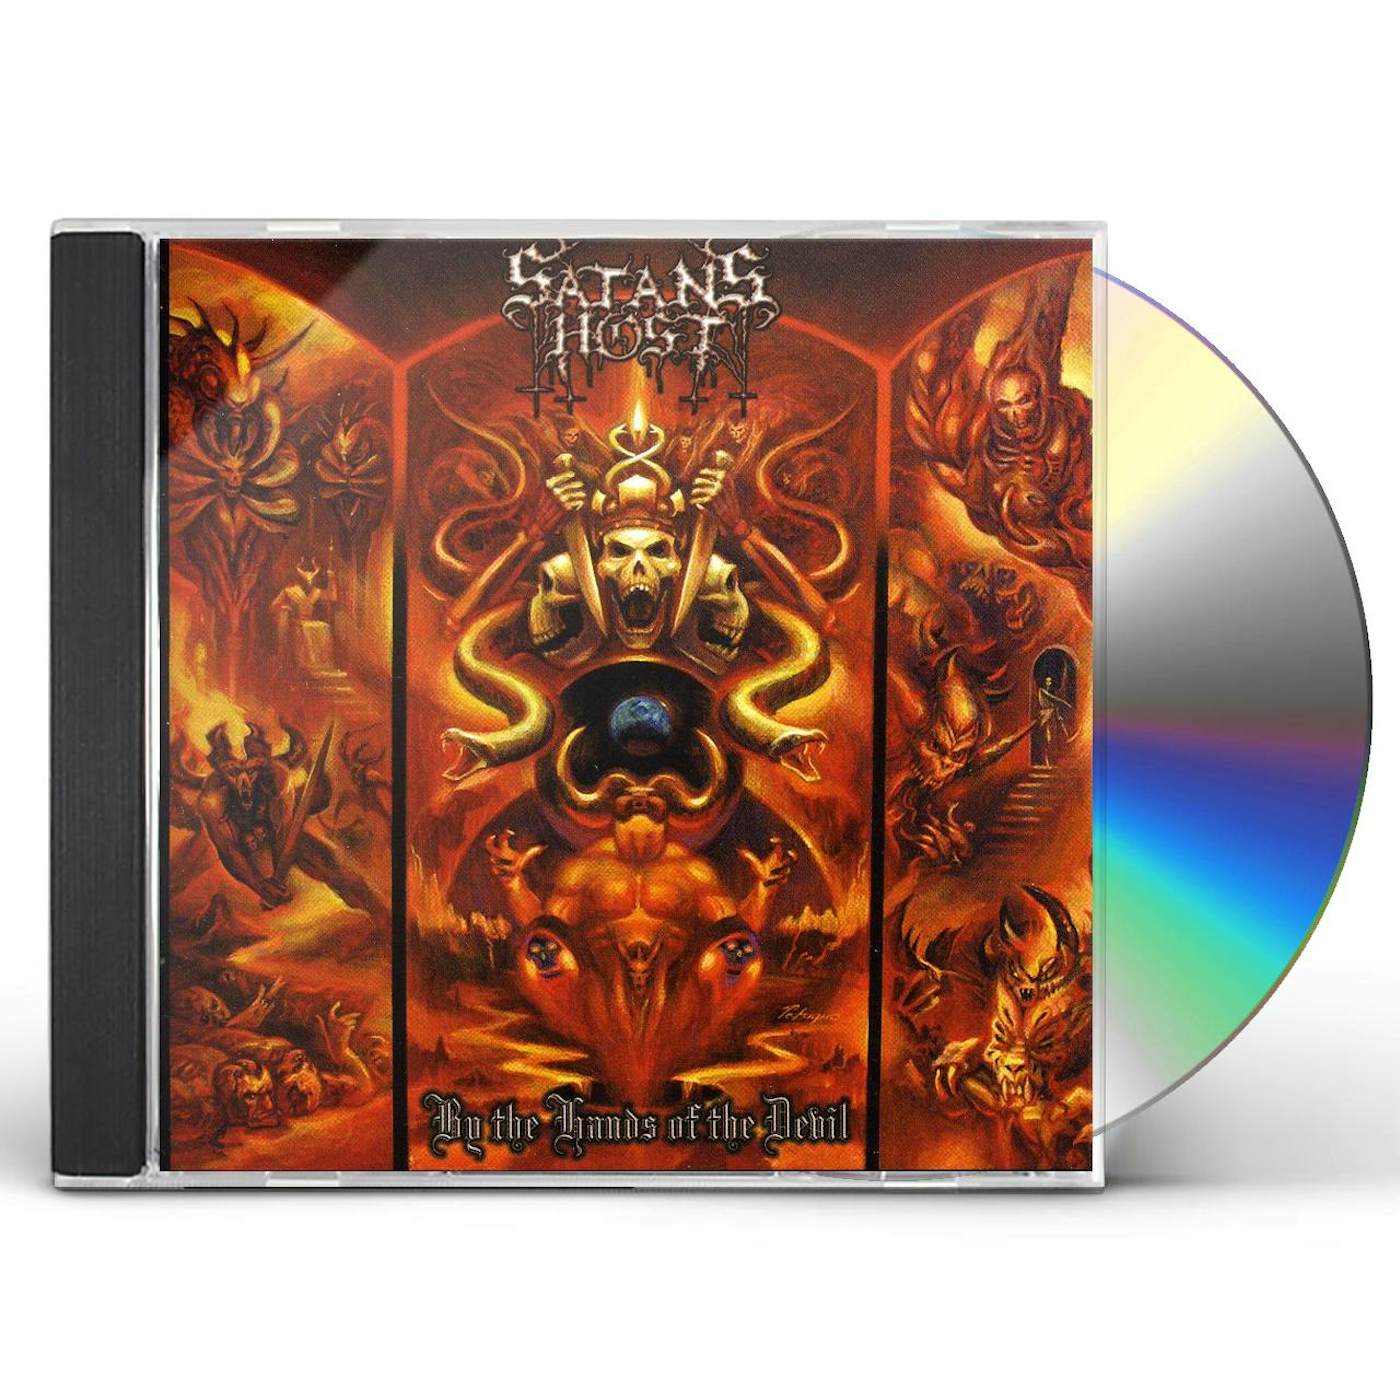 Satan's Host BY THE HANDS OF THE DEVIL CD